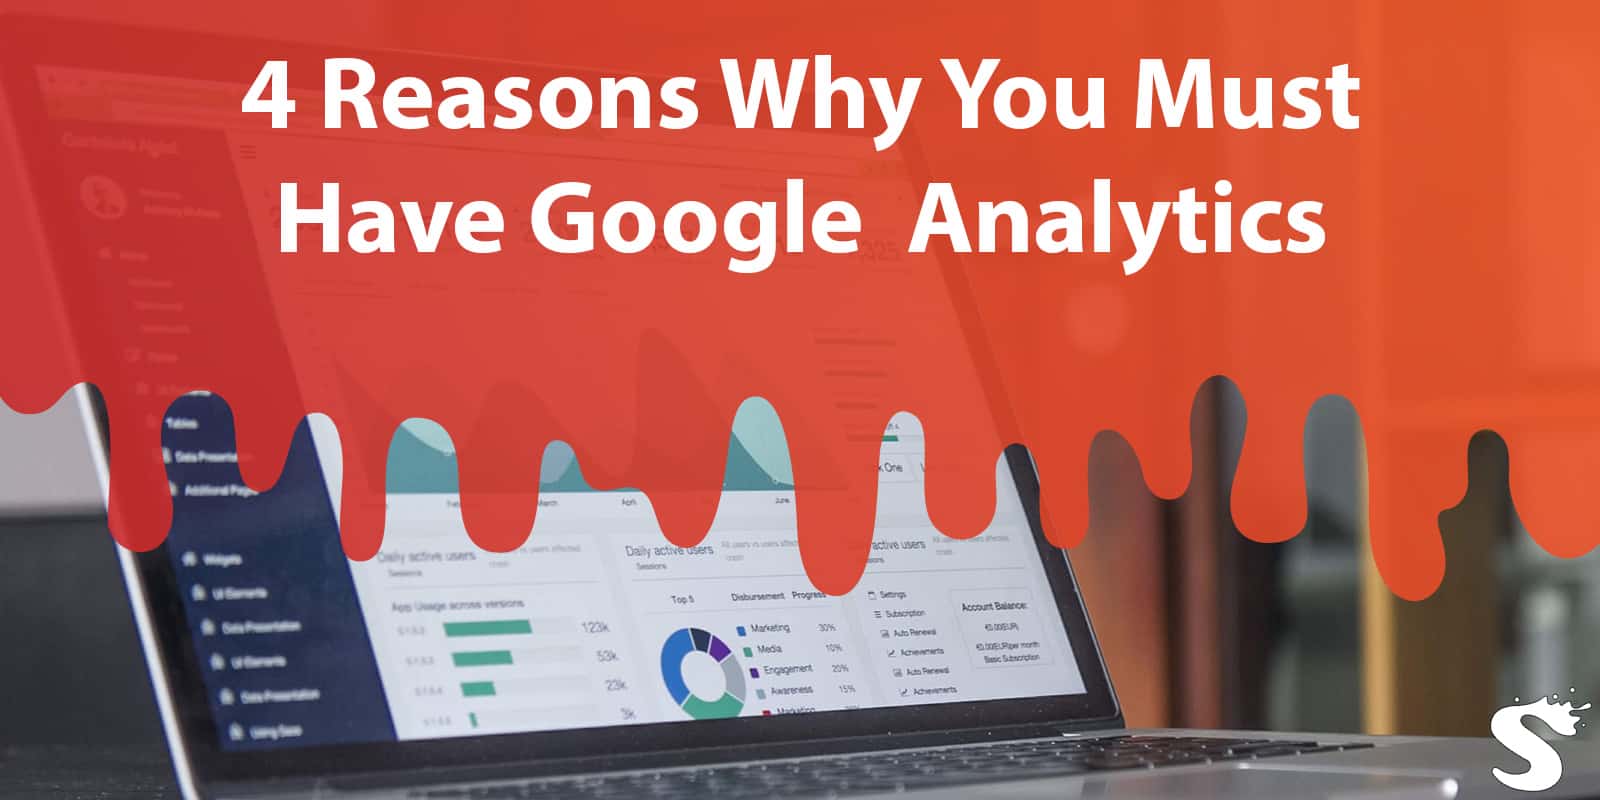 4 Reasons Why You Must Have Google Analytics on Your Website